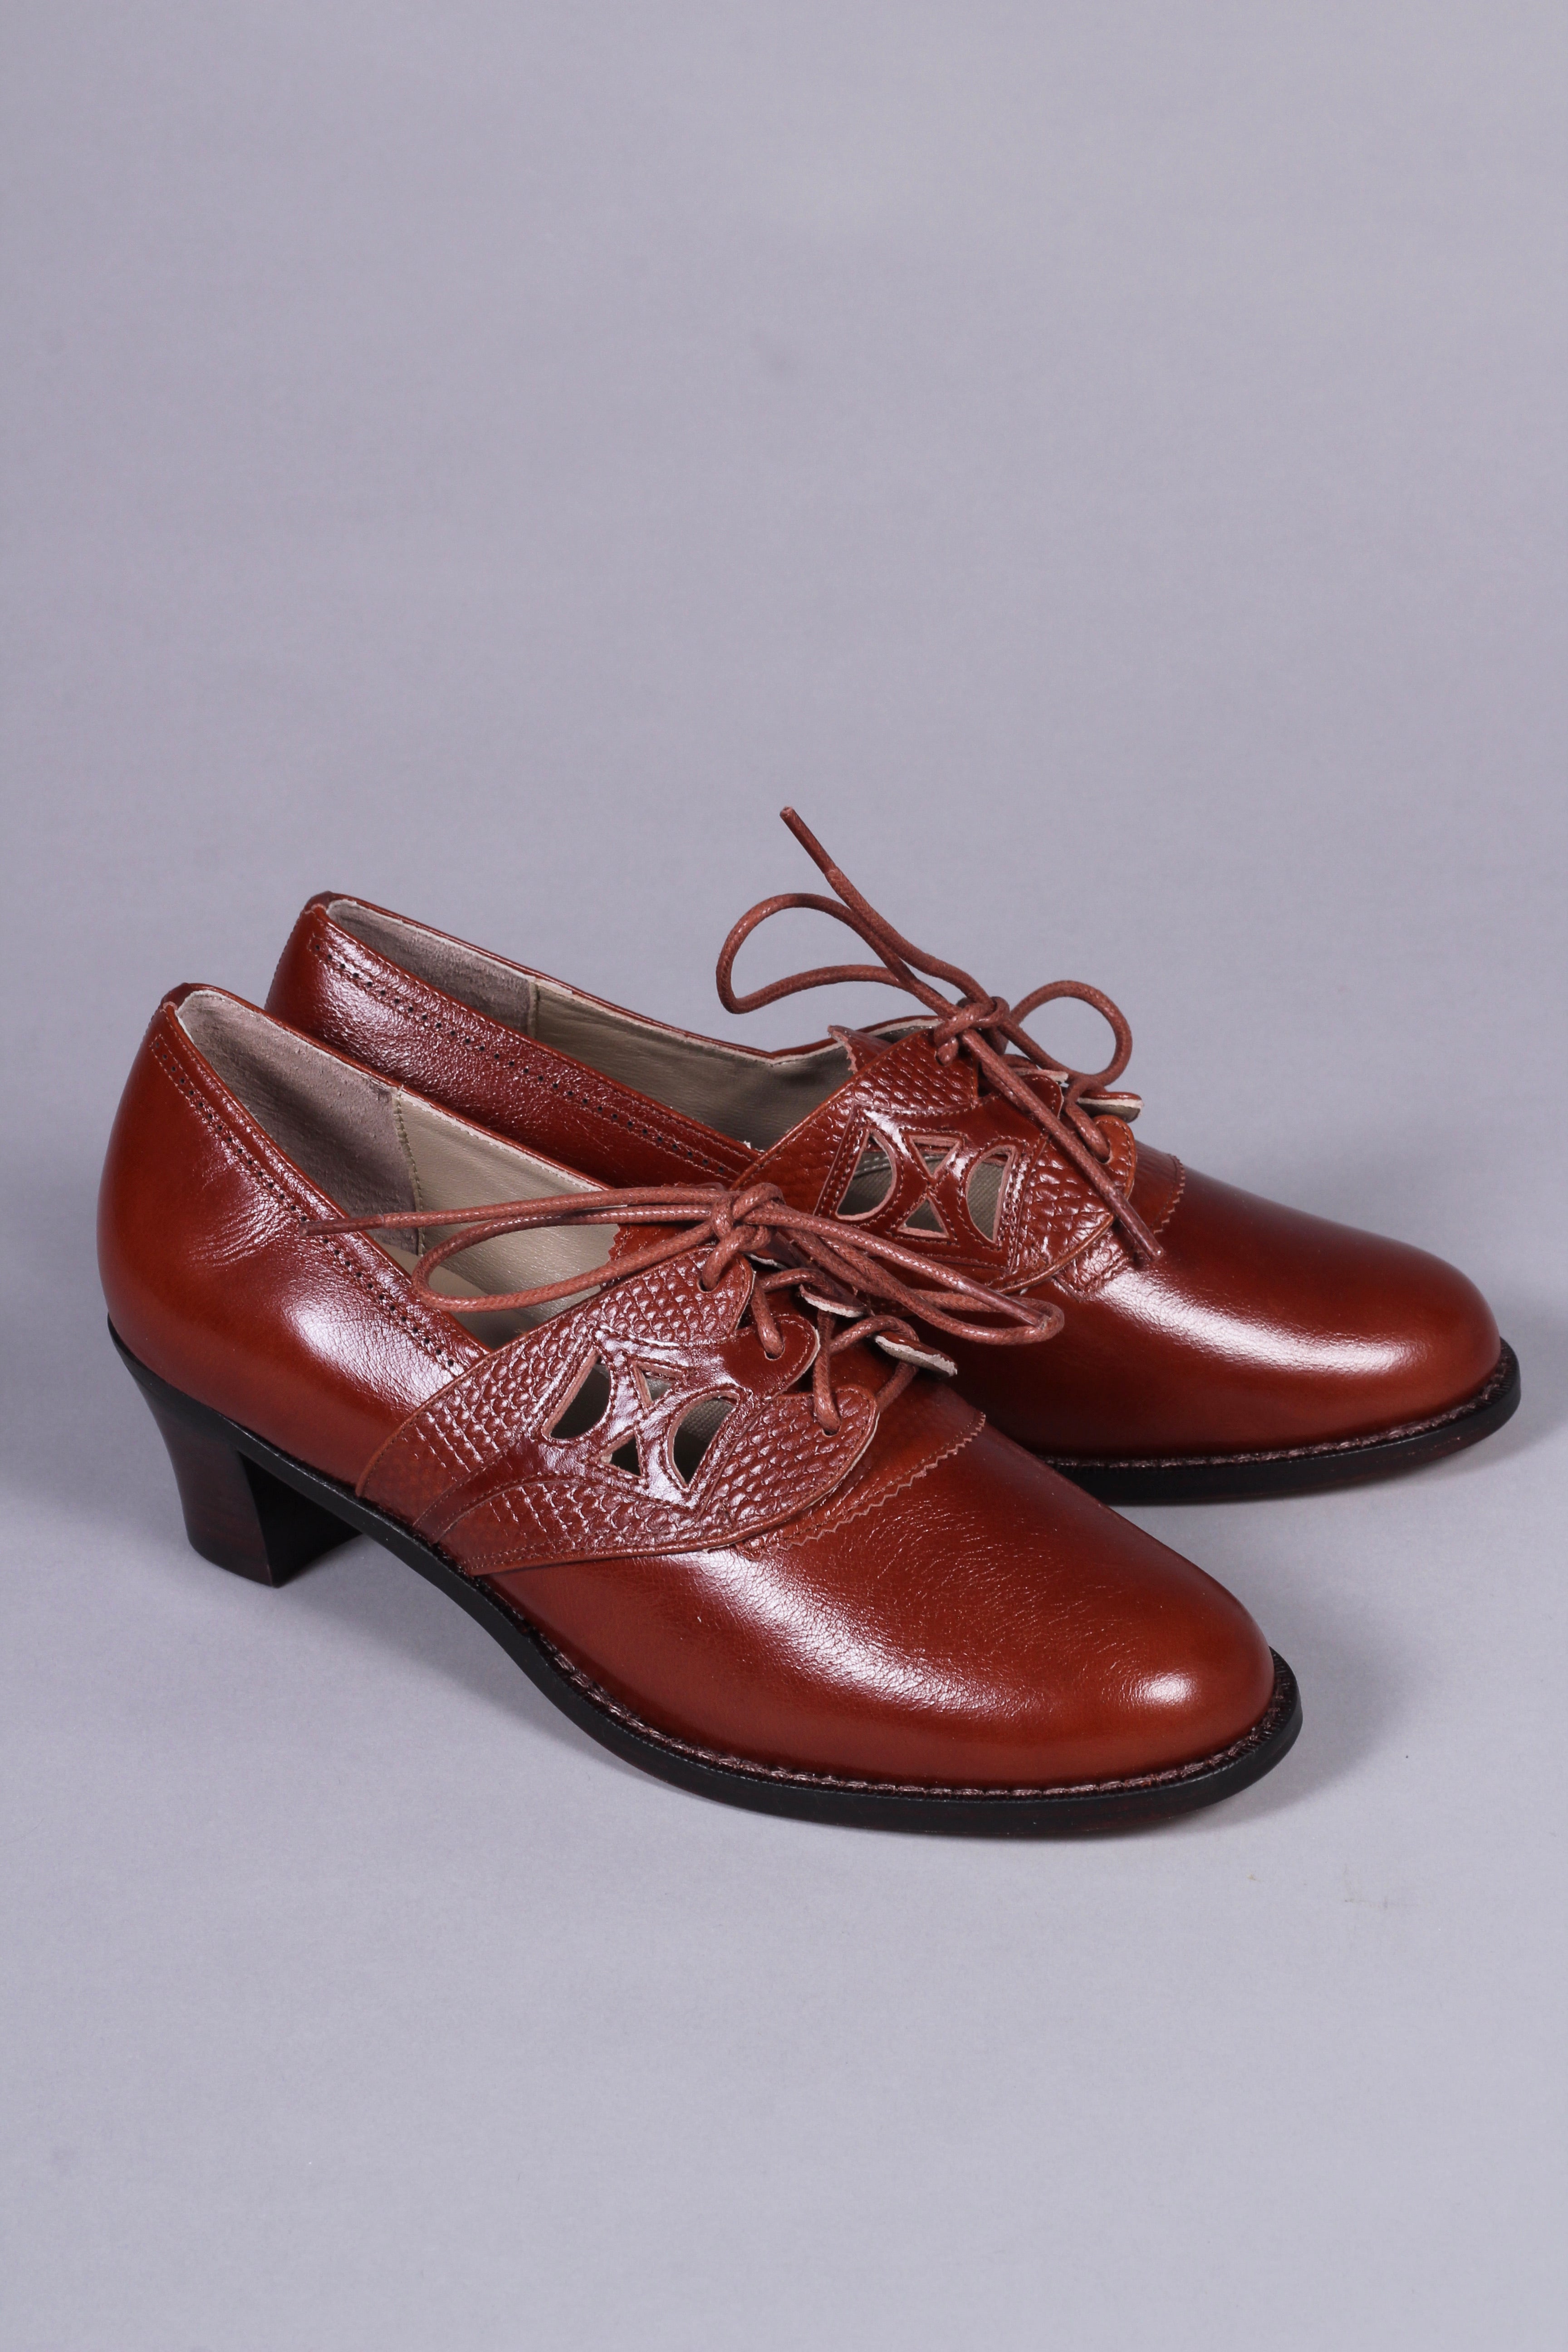 Everyday walking Oxford shoes 30s / 40s - Cognac brown - Emily